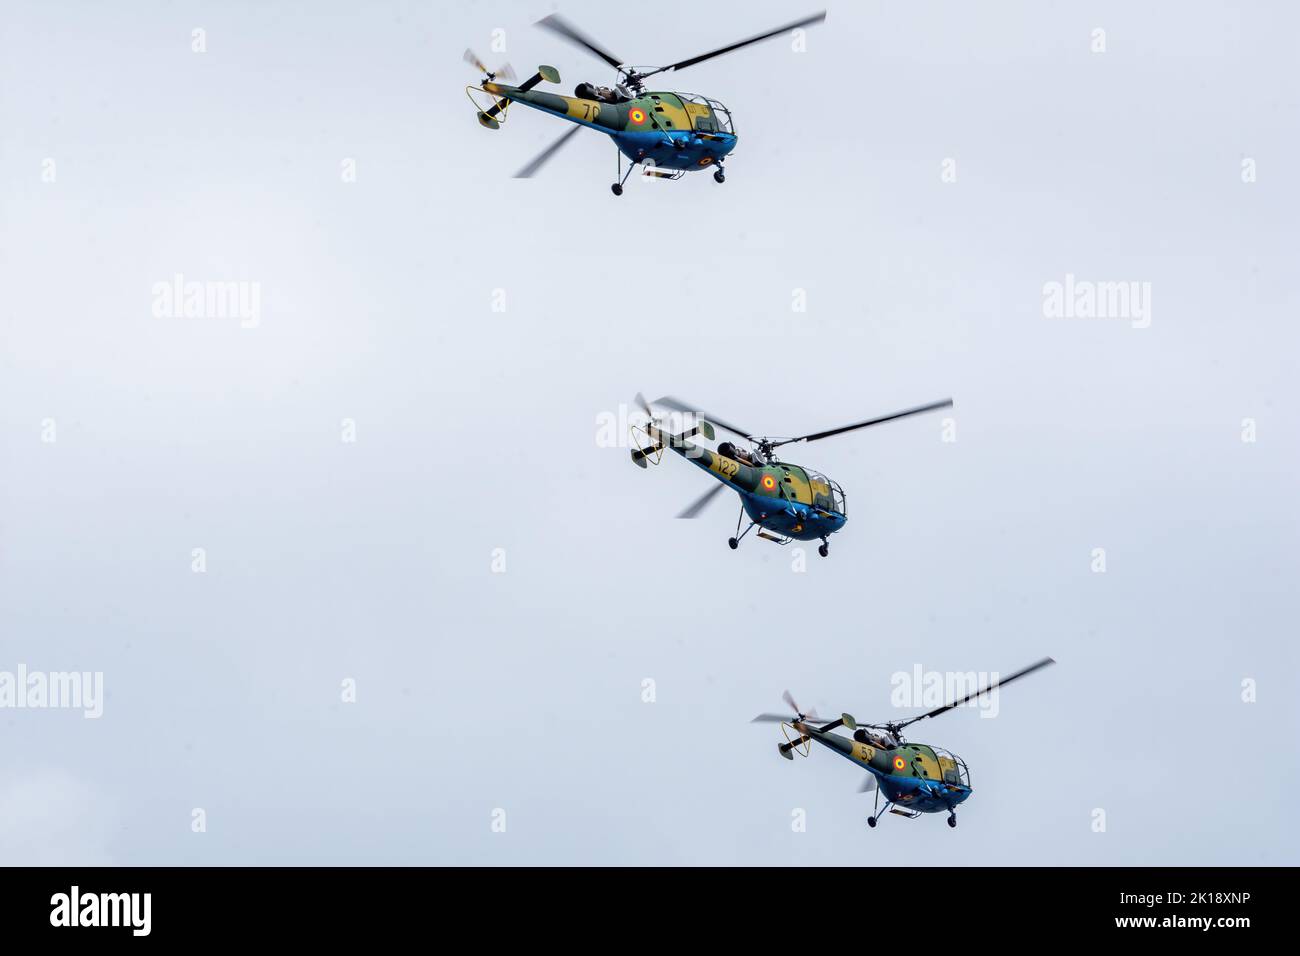 IAR-316 military helicopter of the Romanian Air Forces on the Aurel Vlaicu airport in Bucharest during an air show Stock Photo